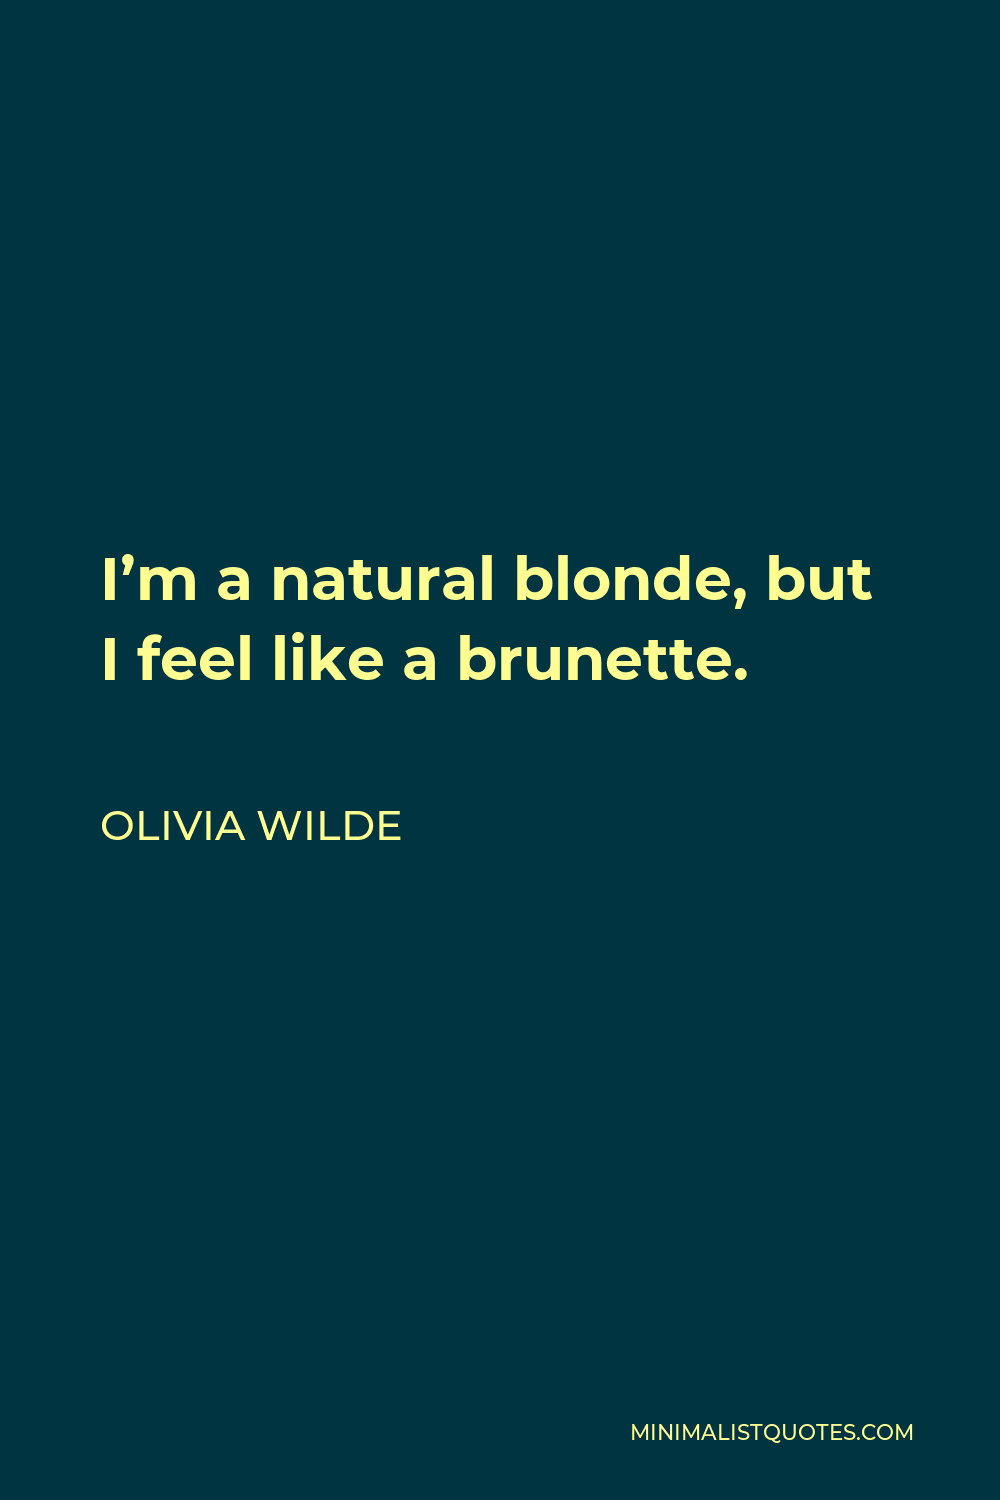 Olivia Wilde Quote - I’m a natural blonde, but I feel like a brunette. I feel like people treat me now how I should be treated. People used to be shocked, when I was blond, that I wasn’t stupid.